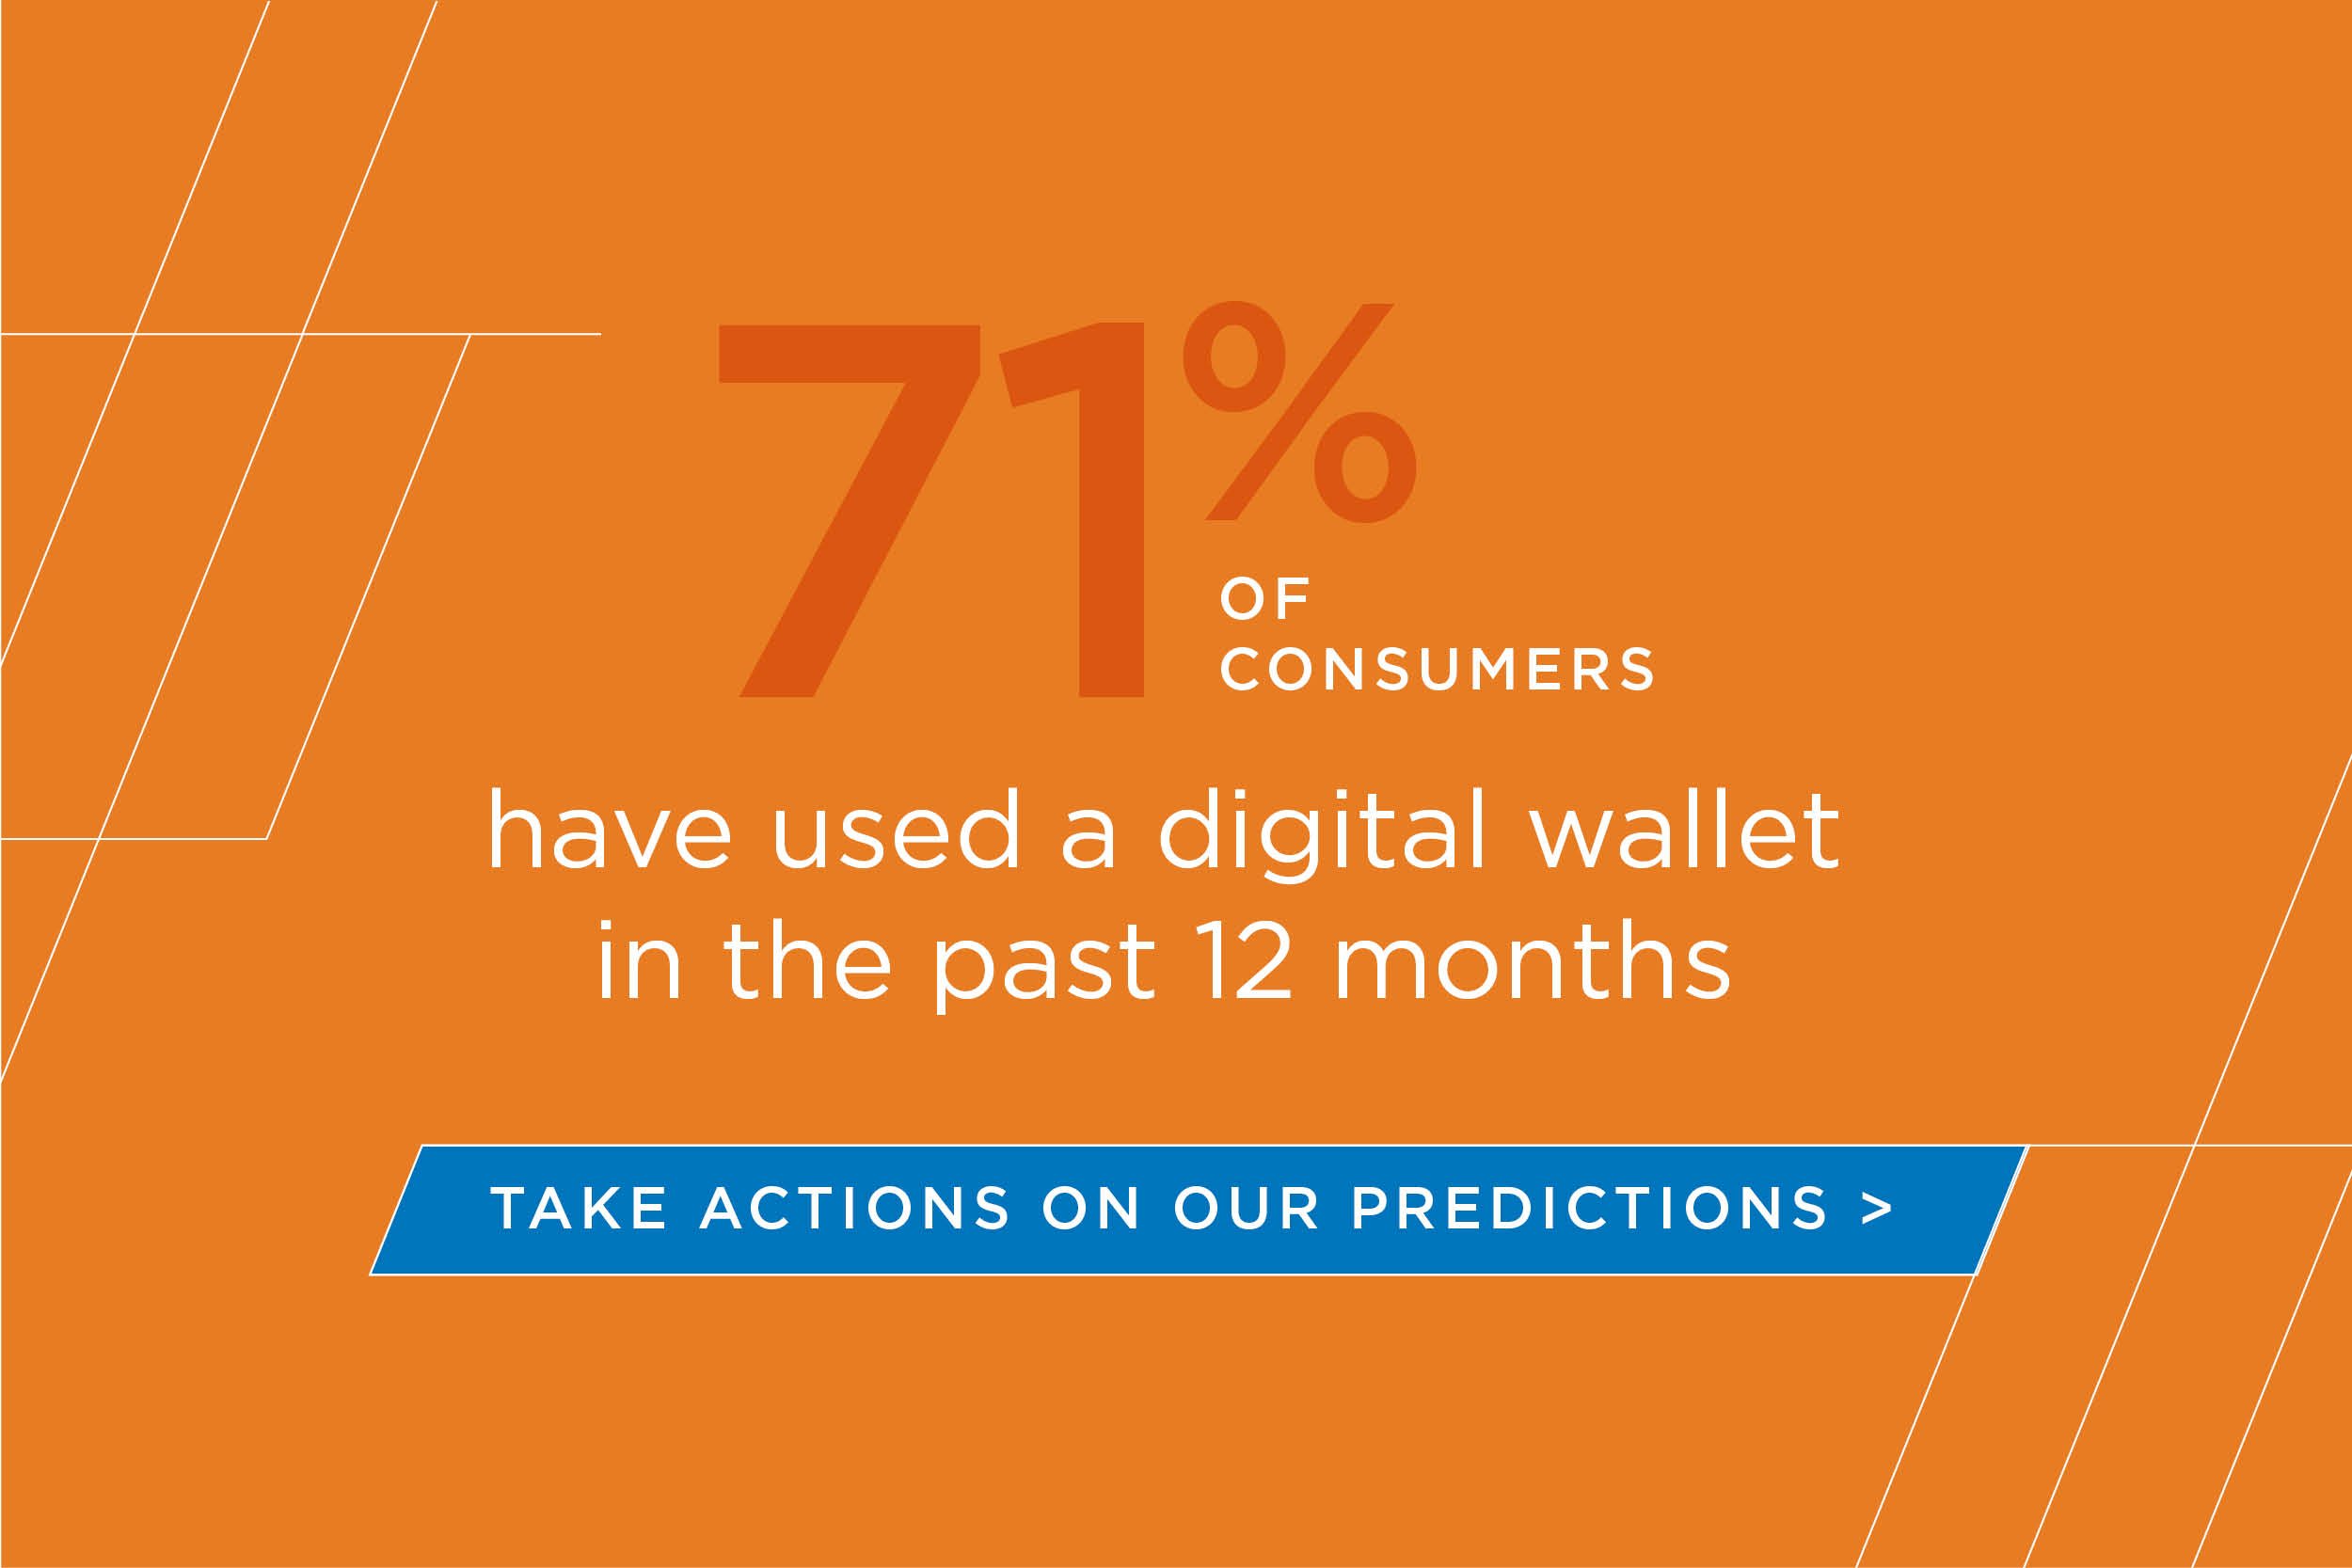 71% of consumers have used a digital wallet in the past 12 months.